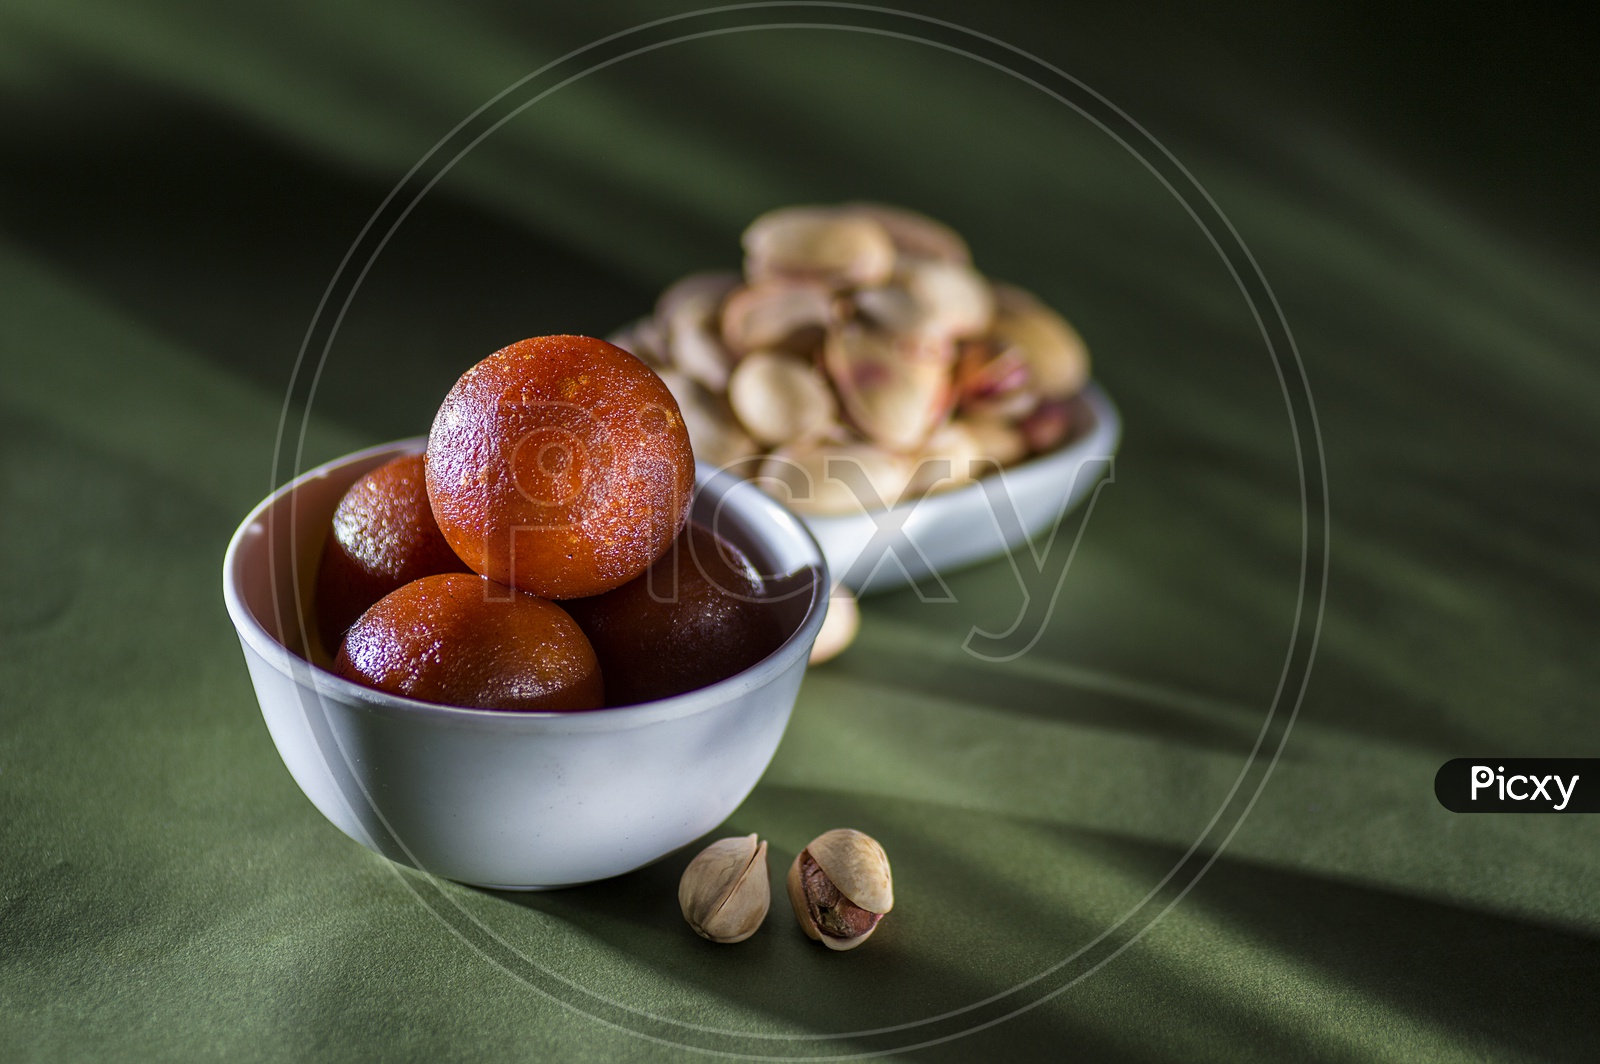 Indian Dessert or Sweet Dish Gulab Jamun in a Bowl with Almond and Pistachio